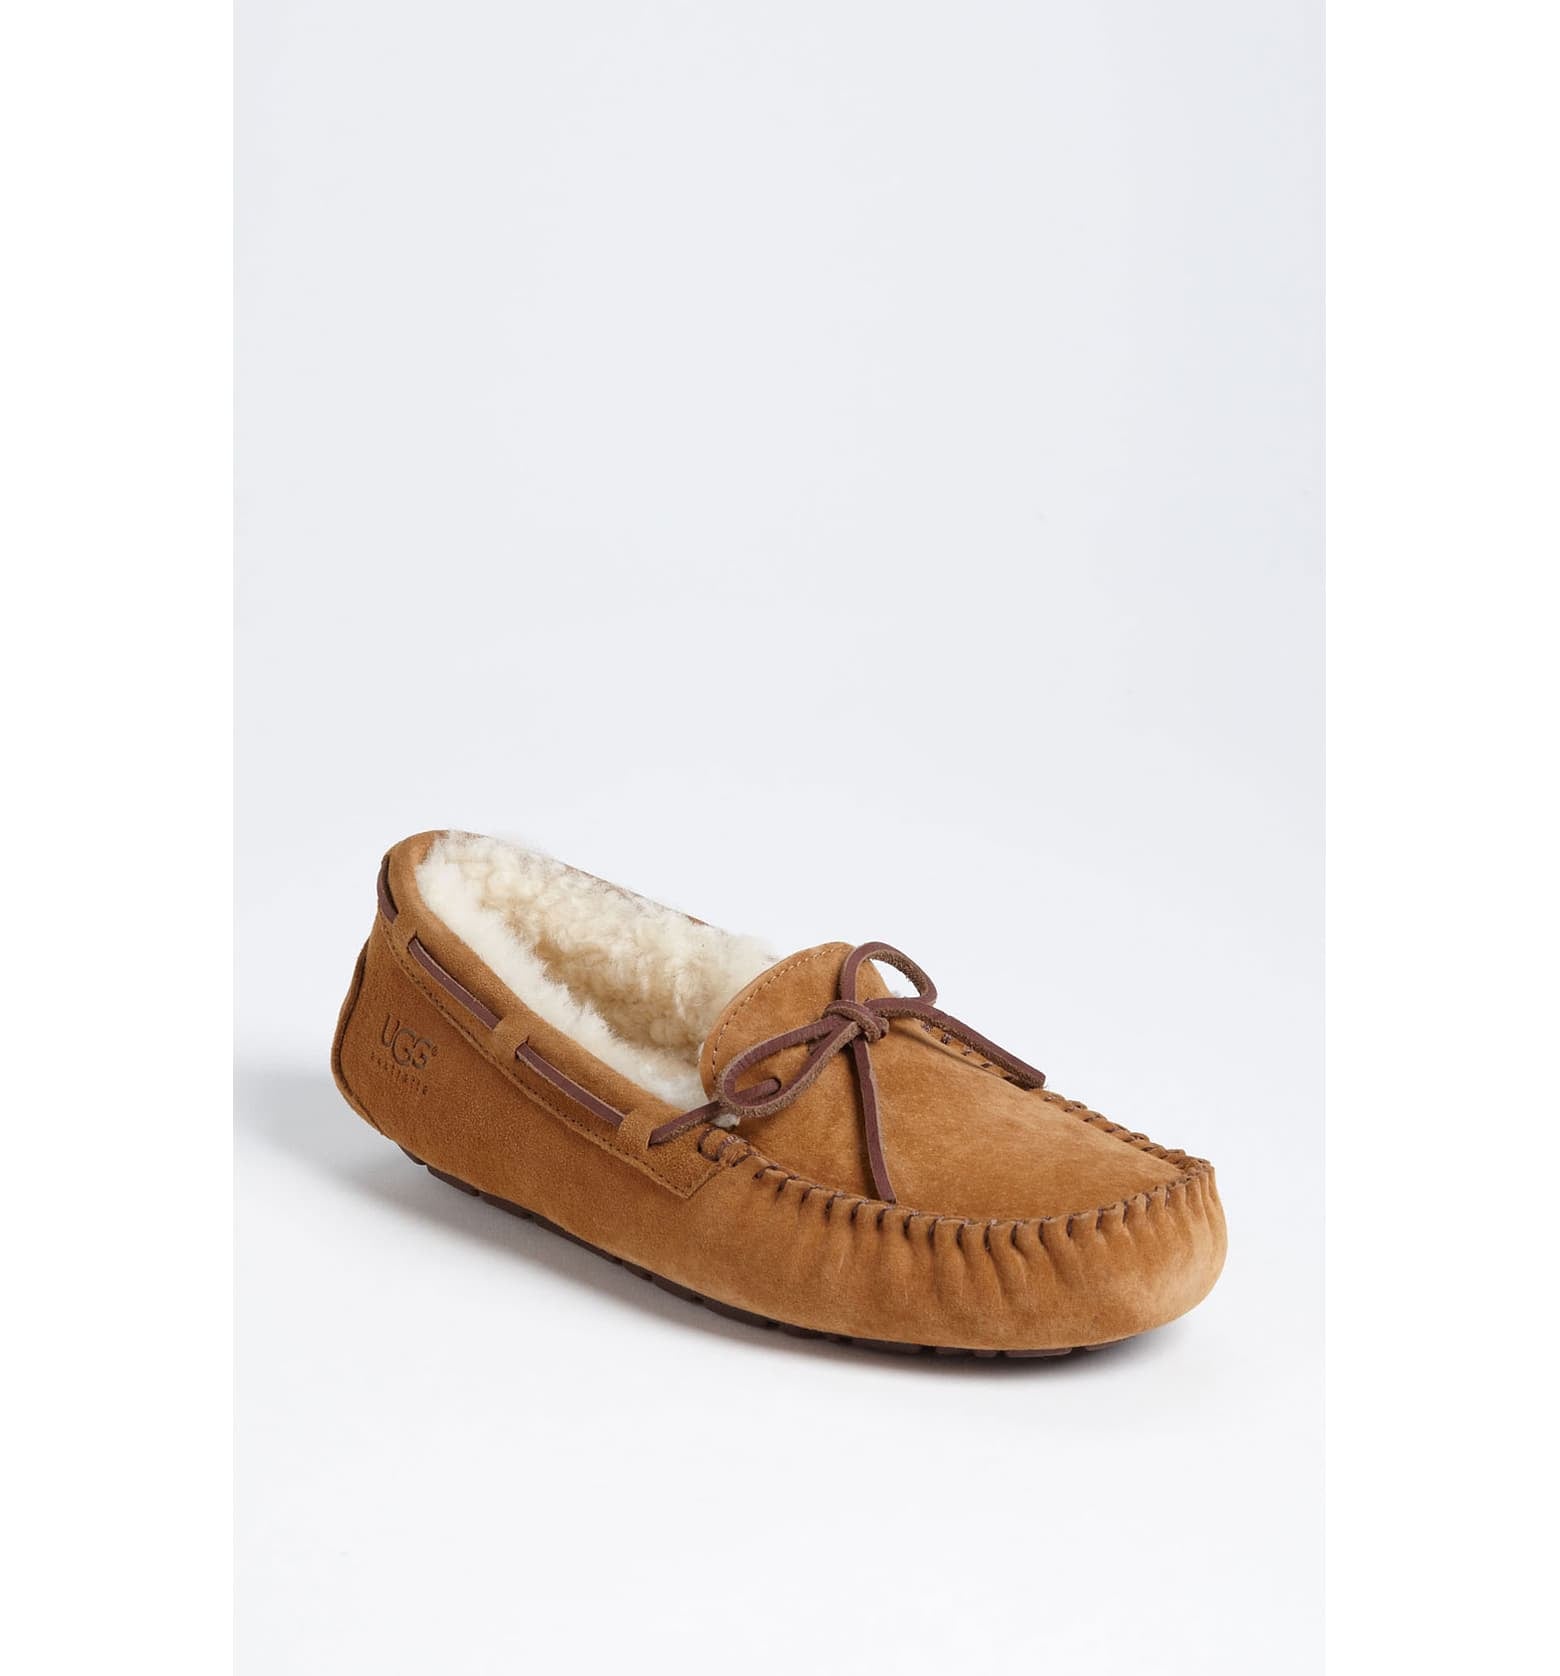 ugg bed slippers